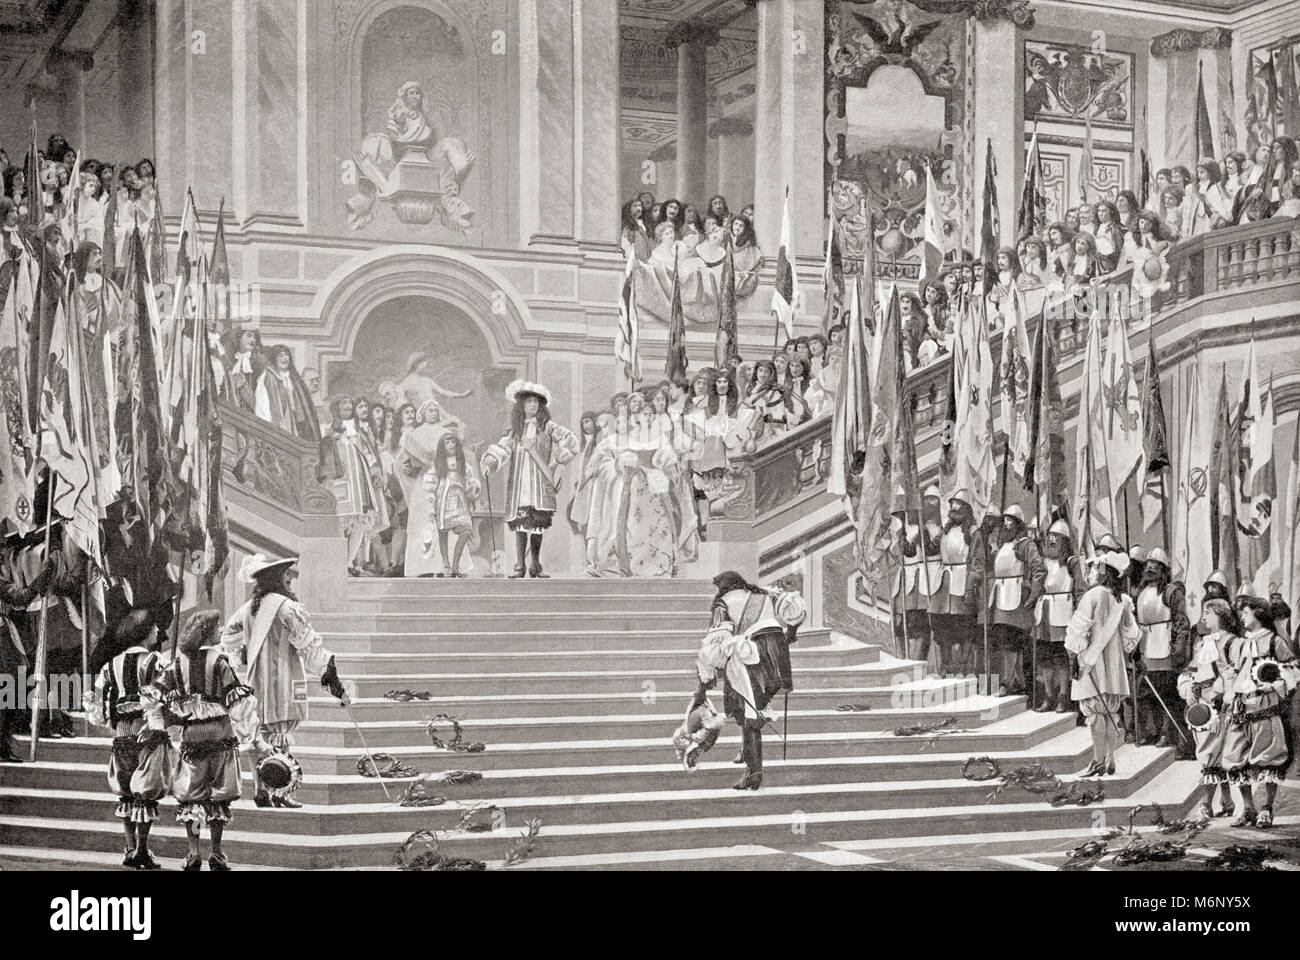 The reception of the Grand Conde held by Louis XIV in 1674.  The Duc d'Enghien, later Louis de Bourbon or Louis II, Prince of Condé, 1621 – 1686.  French general.  From Hutchinson's History of the Nations, published 1915. Stock Photo